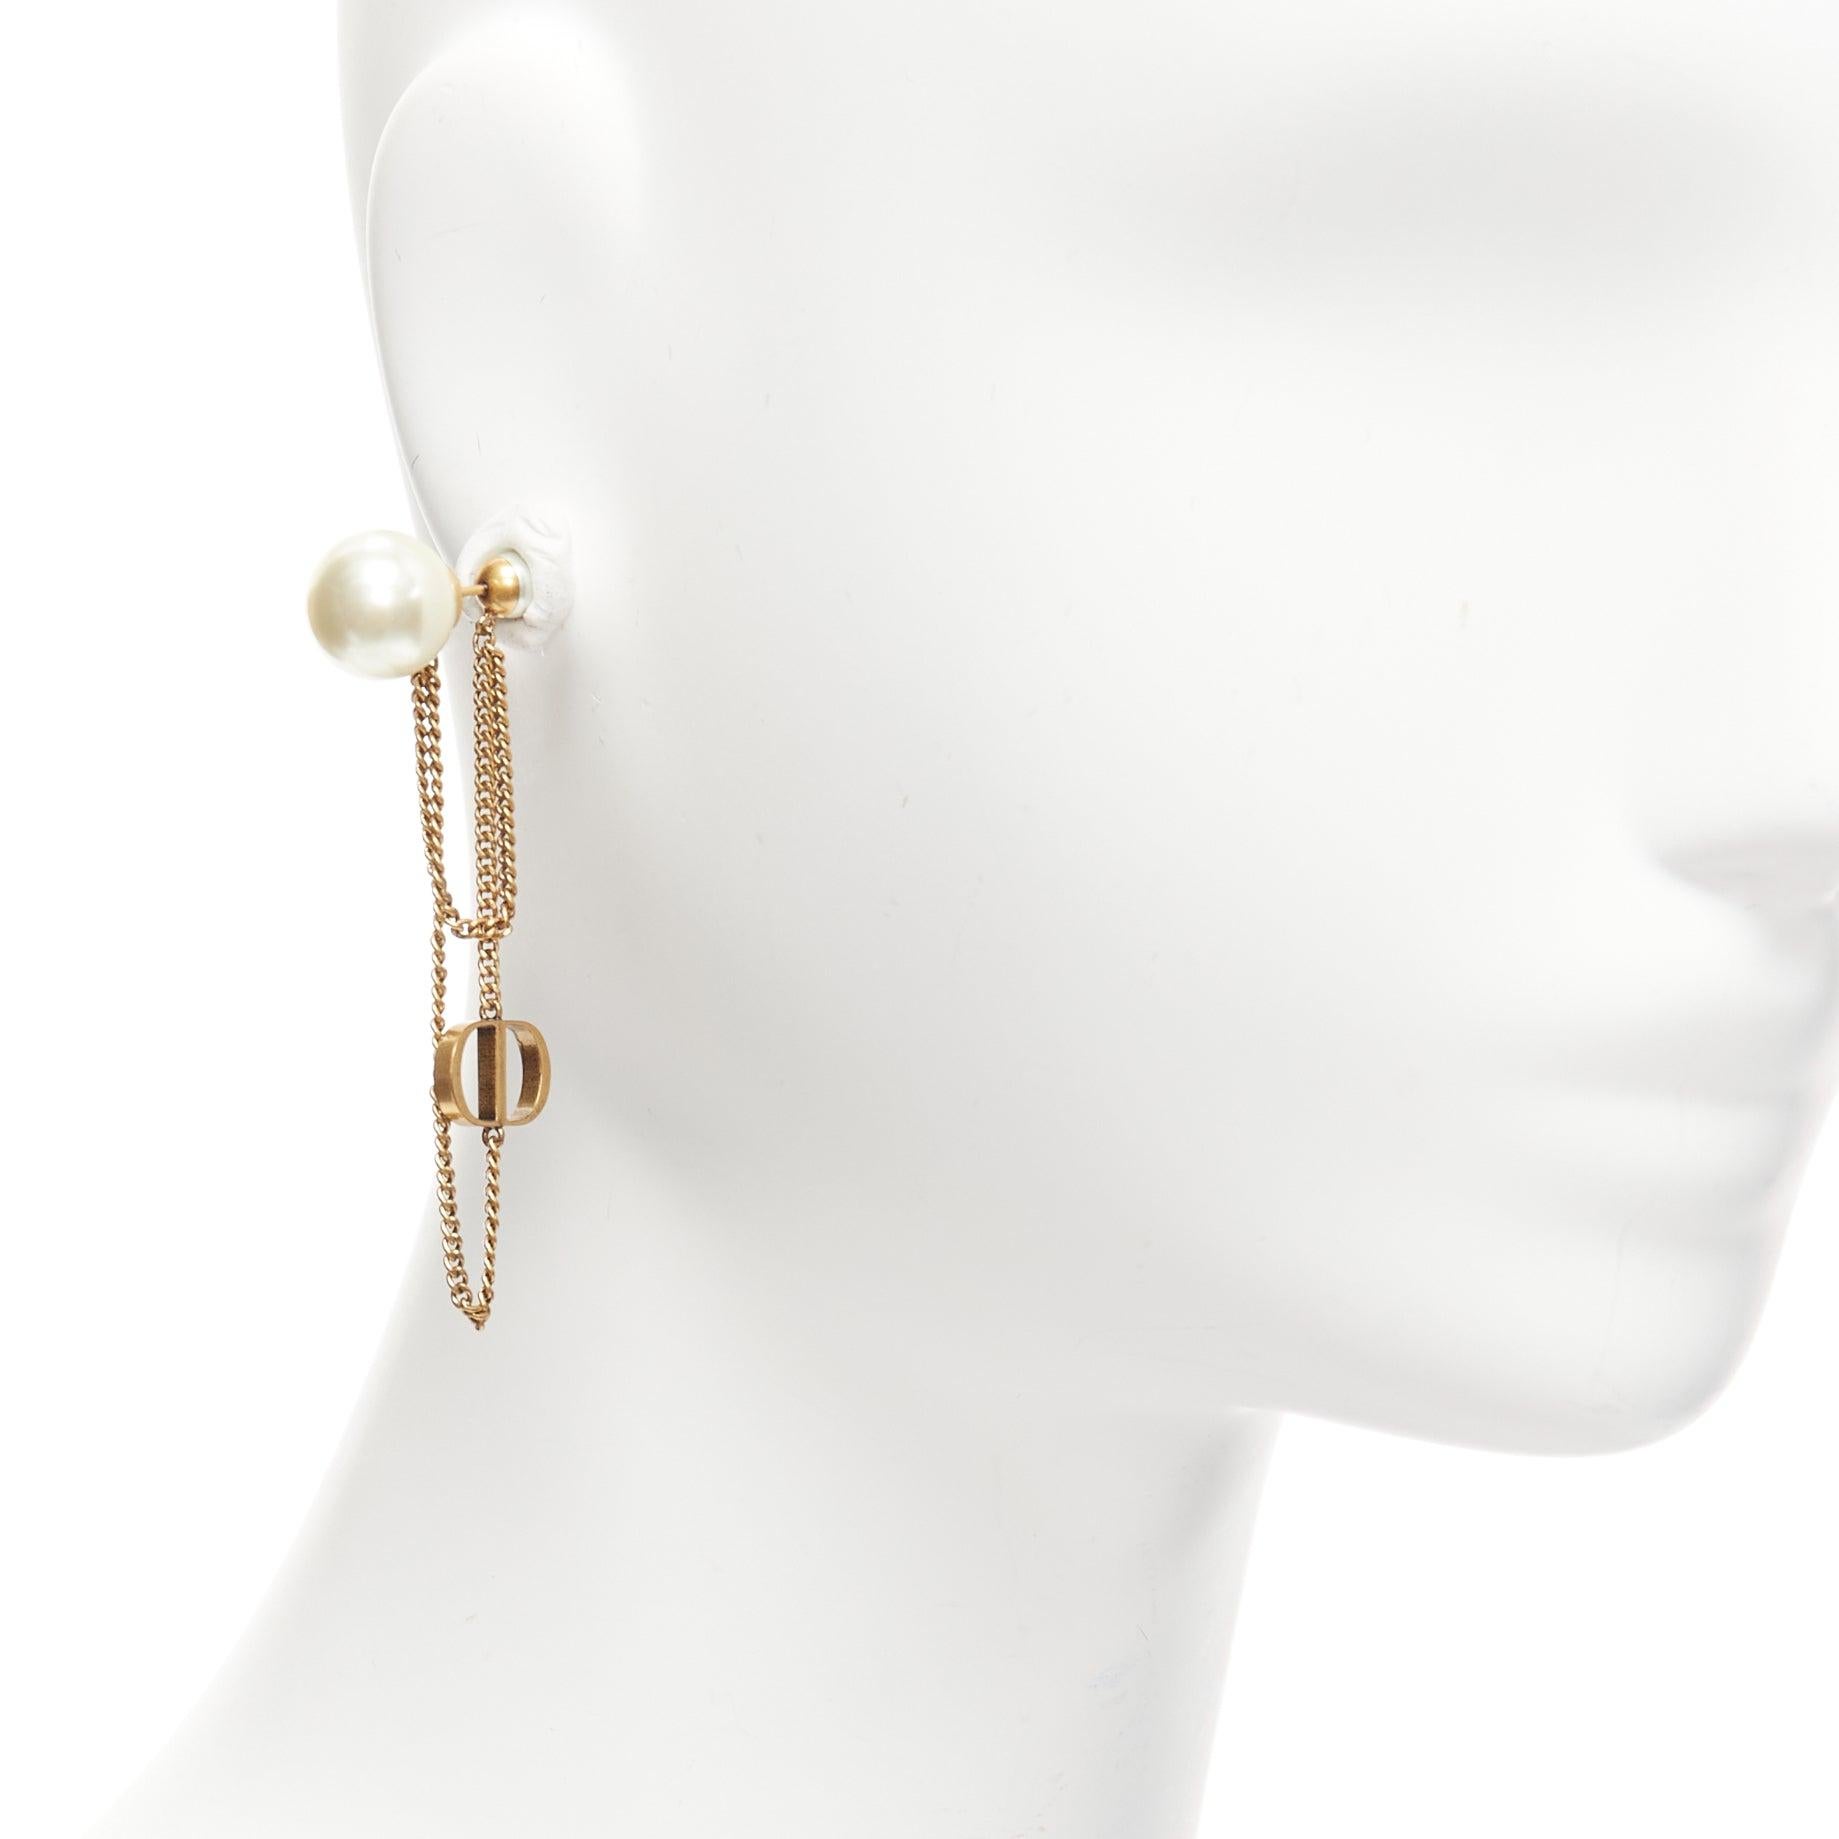 DIOR Tribales double pearls CD charm drop dangling chain pin earrings pair
Reference: AAWC/A01058
Brand: Dior
Designer: Maria Grazia Chiuri
Material: Metal, Faux Pearl
Color: Bronze, Pearl
Pattern: Solid
Closure: Pin
Lining: Gold